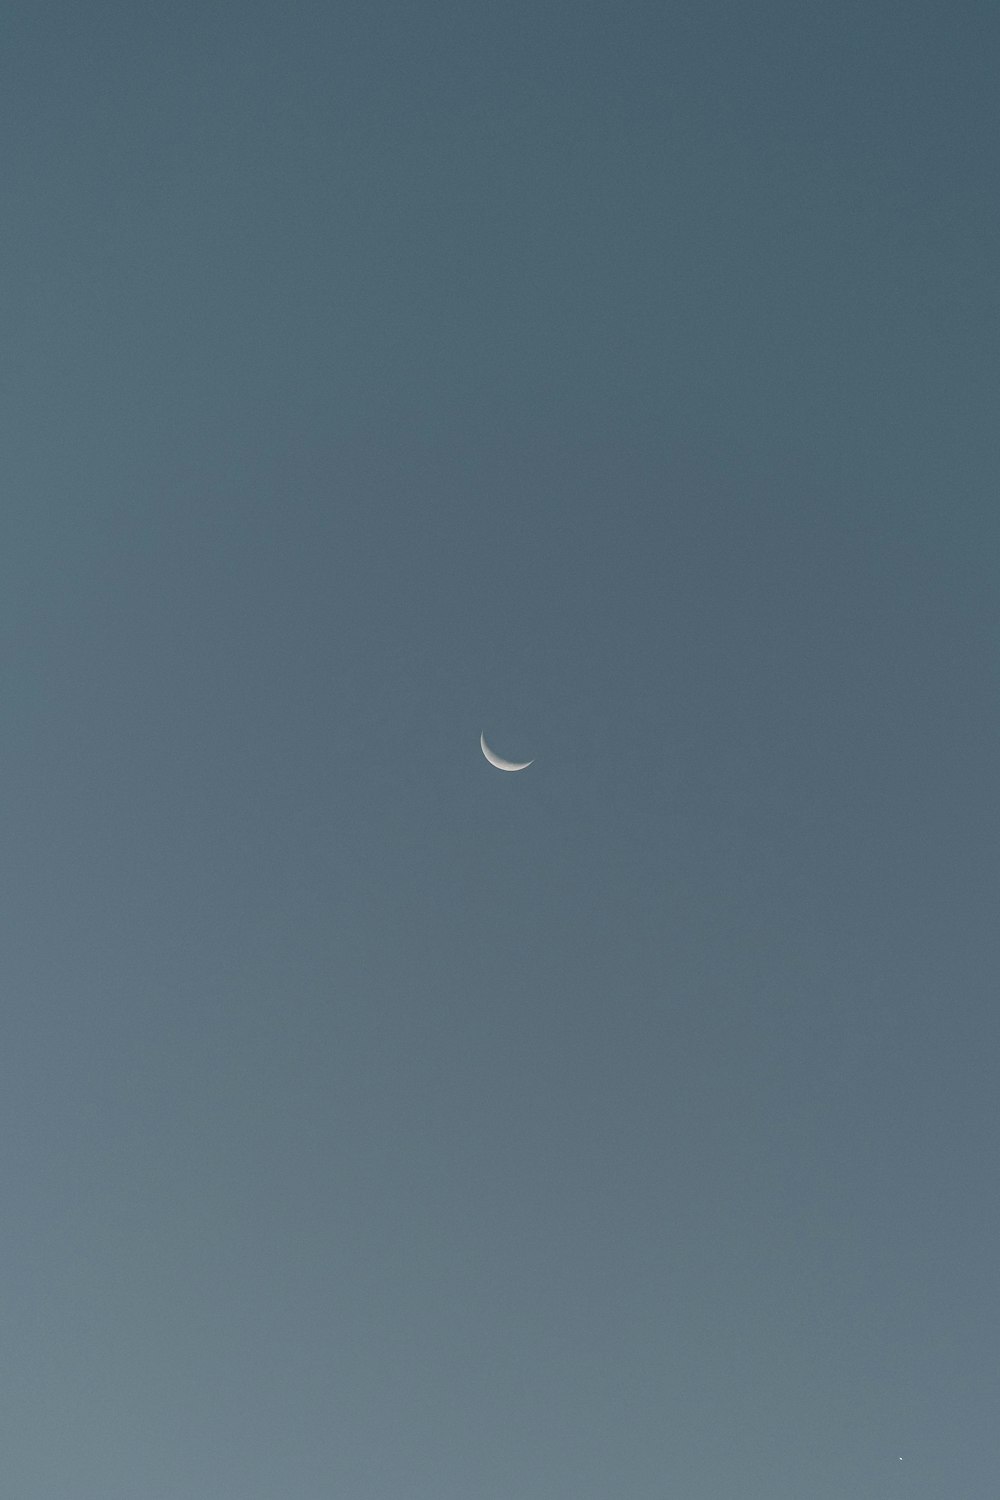 a plane flying in the sky with a half moon